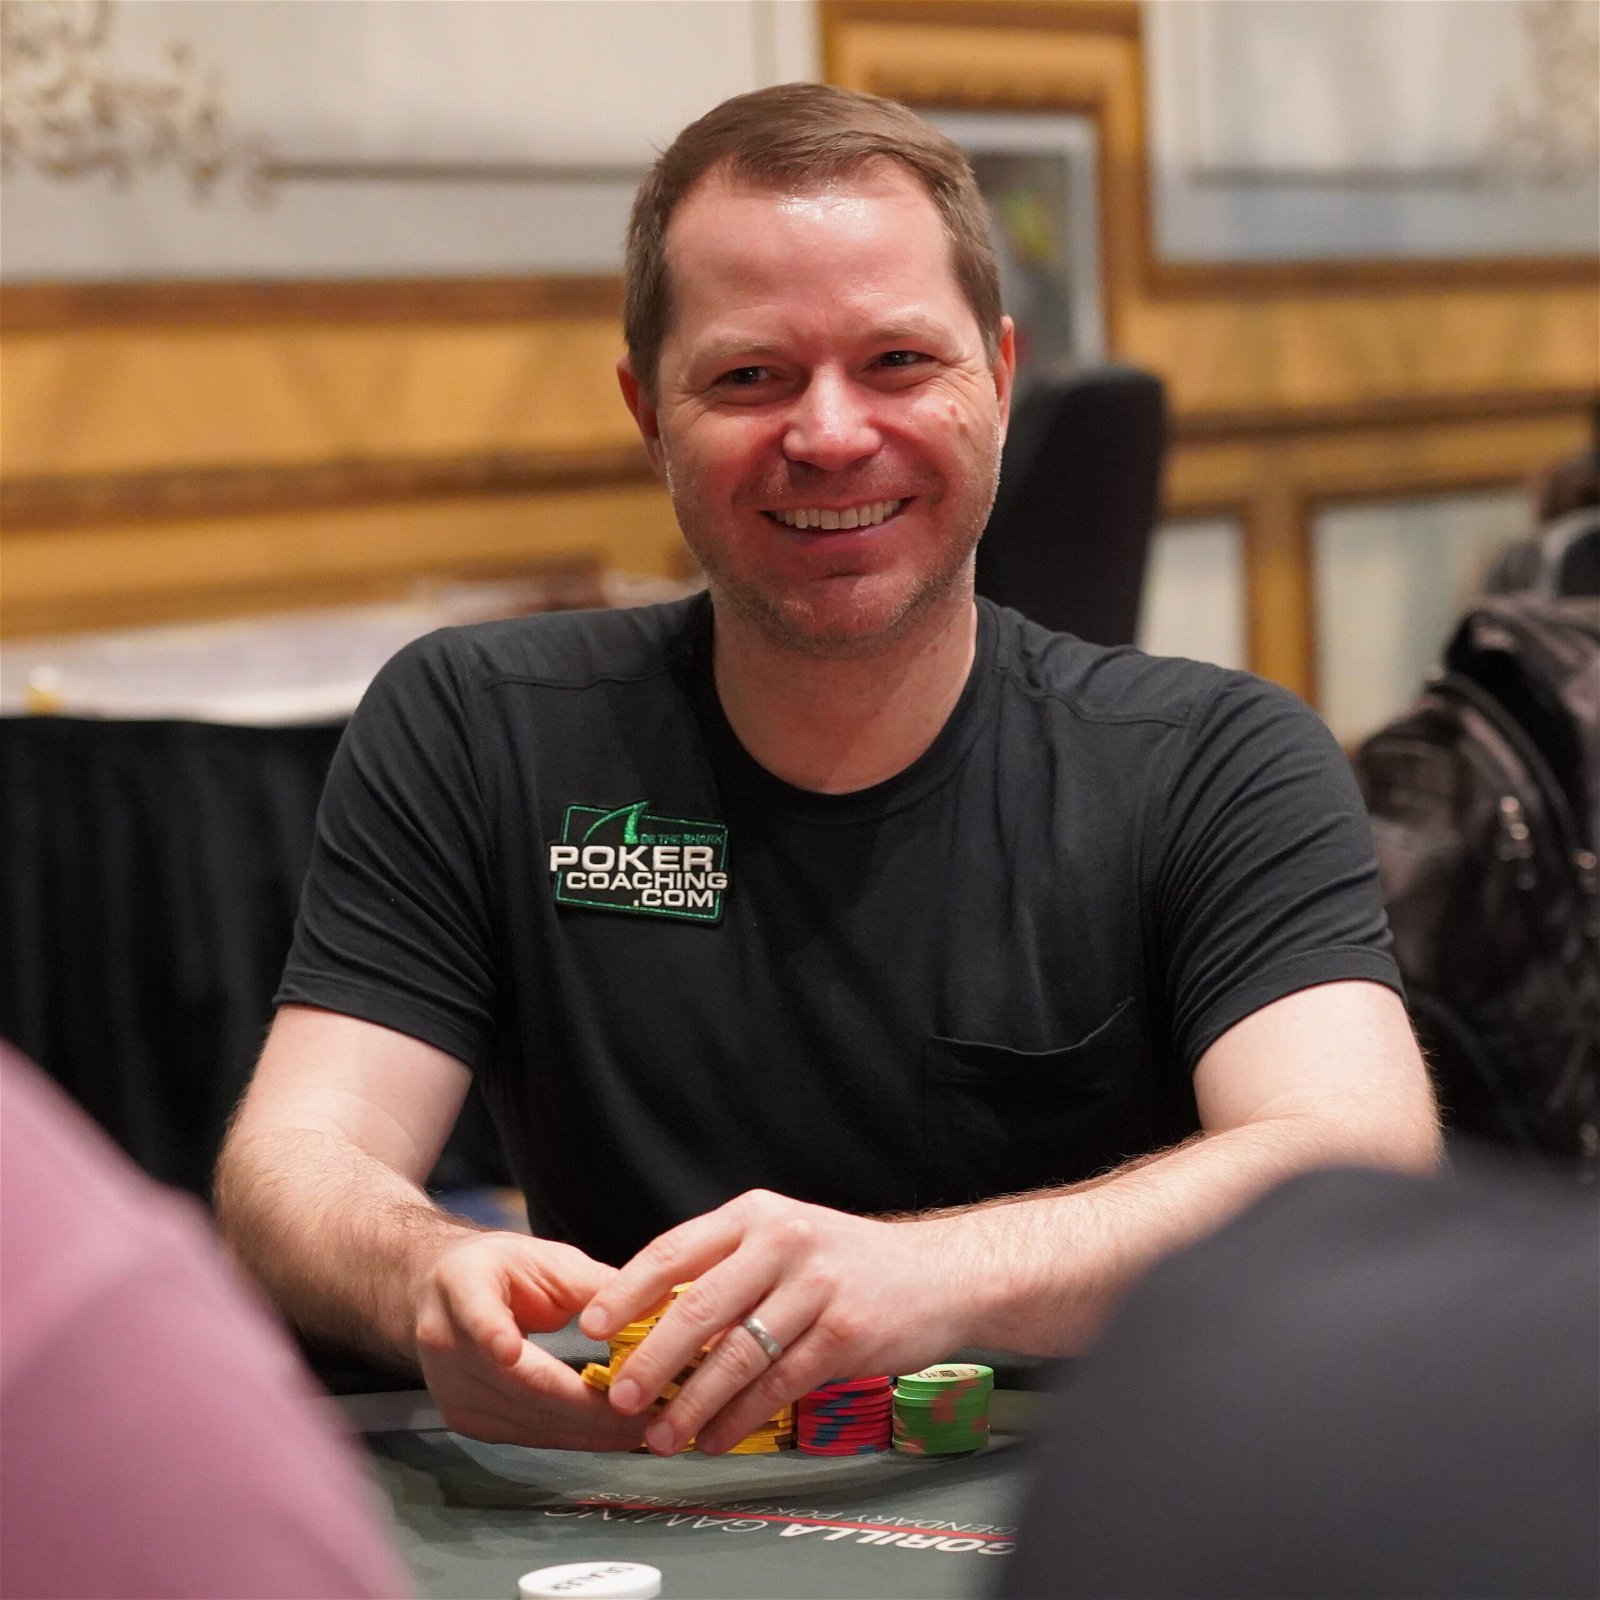 Jonathan Little smiling and wearing a PokerCoaching.com patch at the poker table